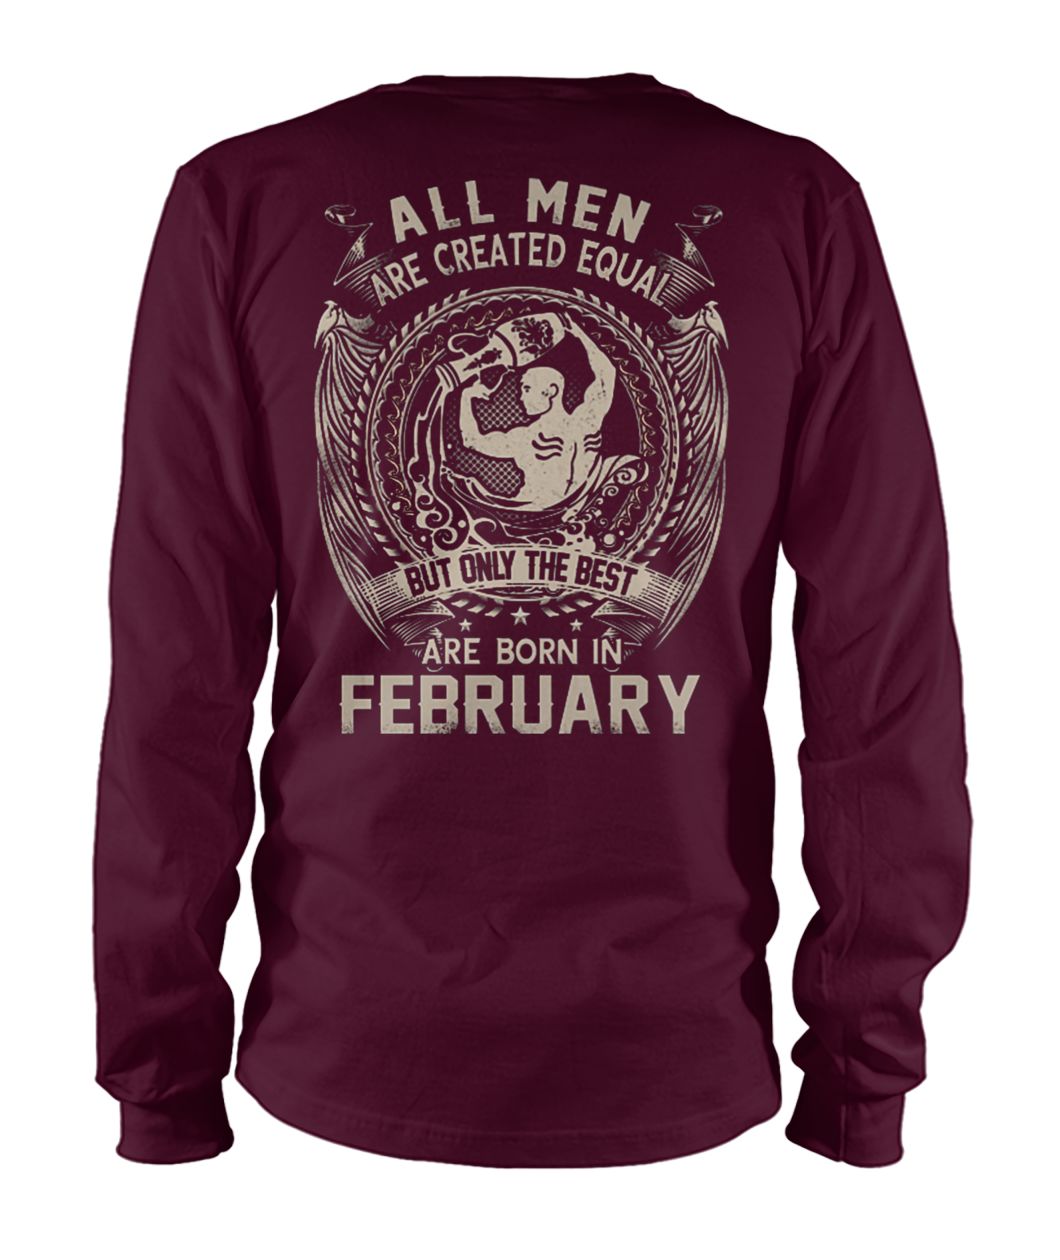 All men created equal but the best are born in february unisex long sleeve